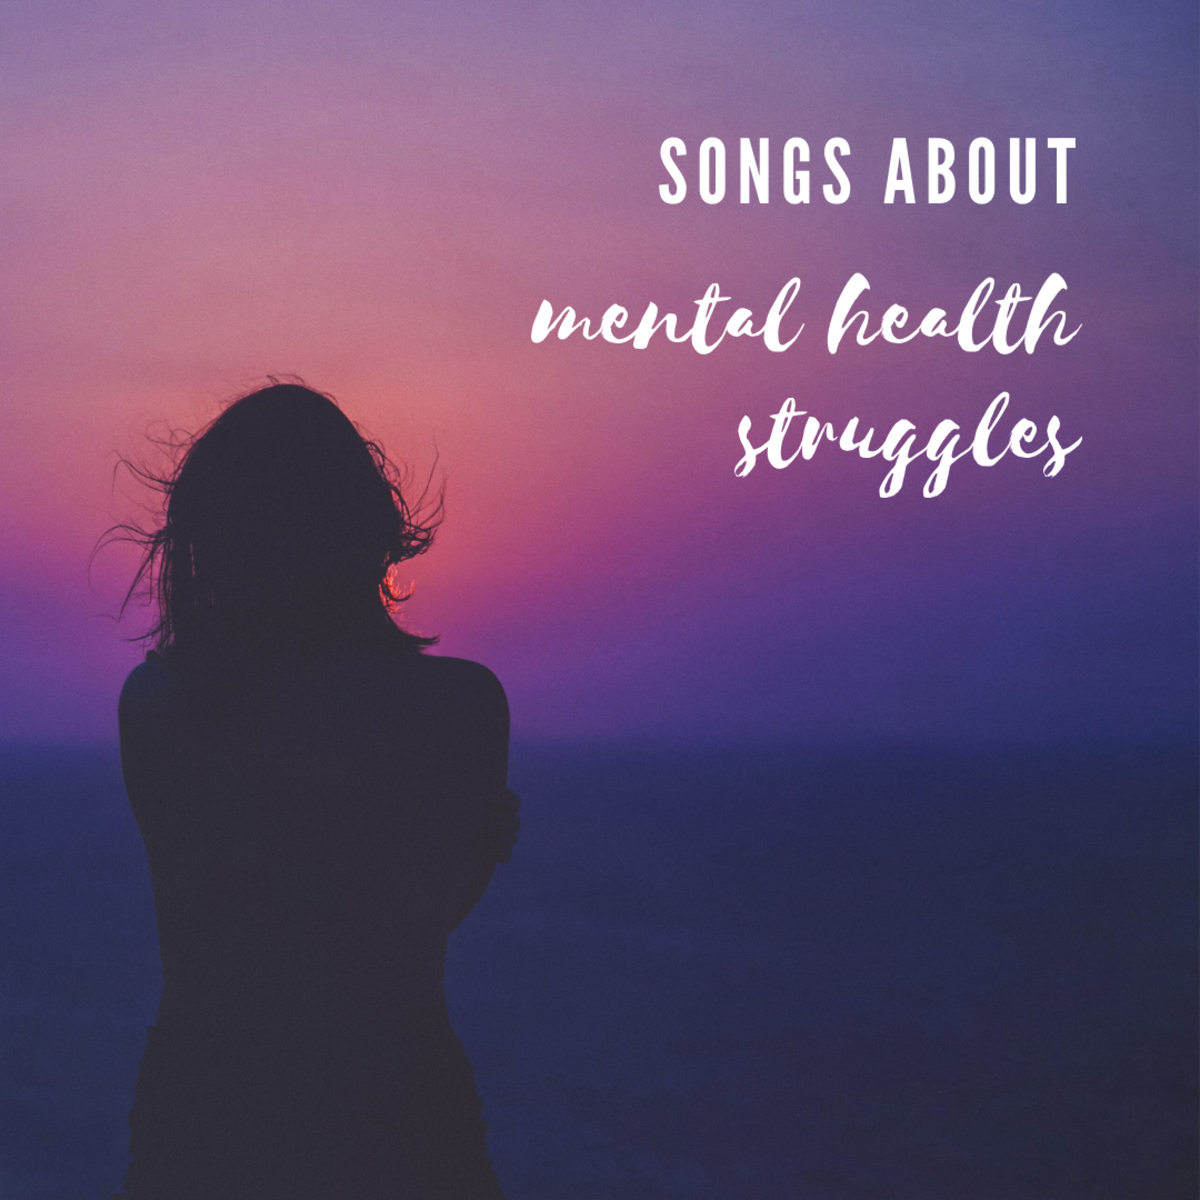 35 Best Hit Songs About Anxiety, Depression, and Other Mental Illnesses